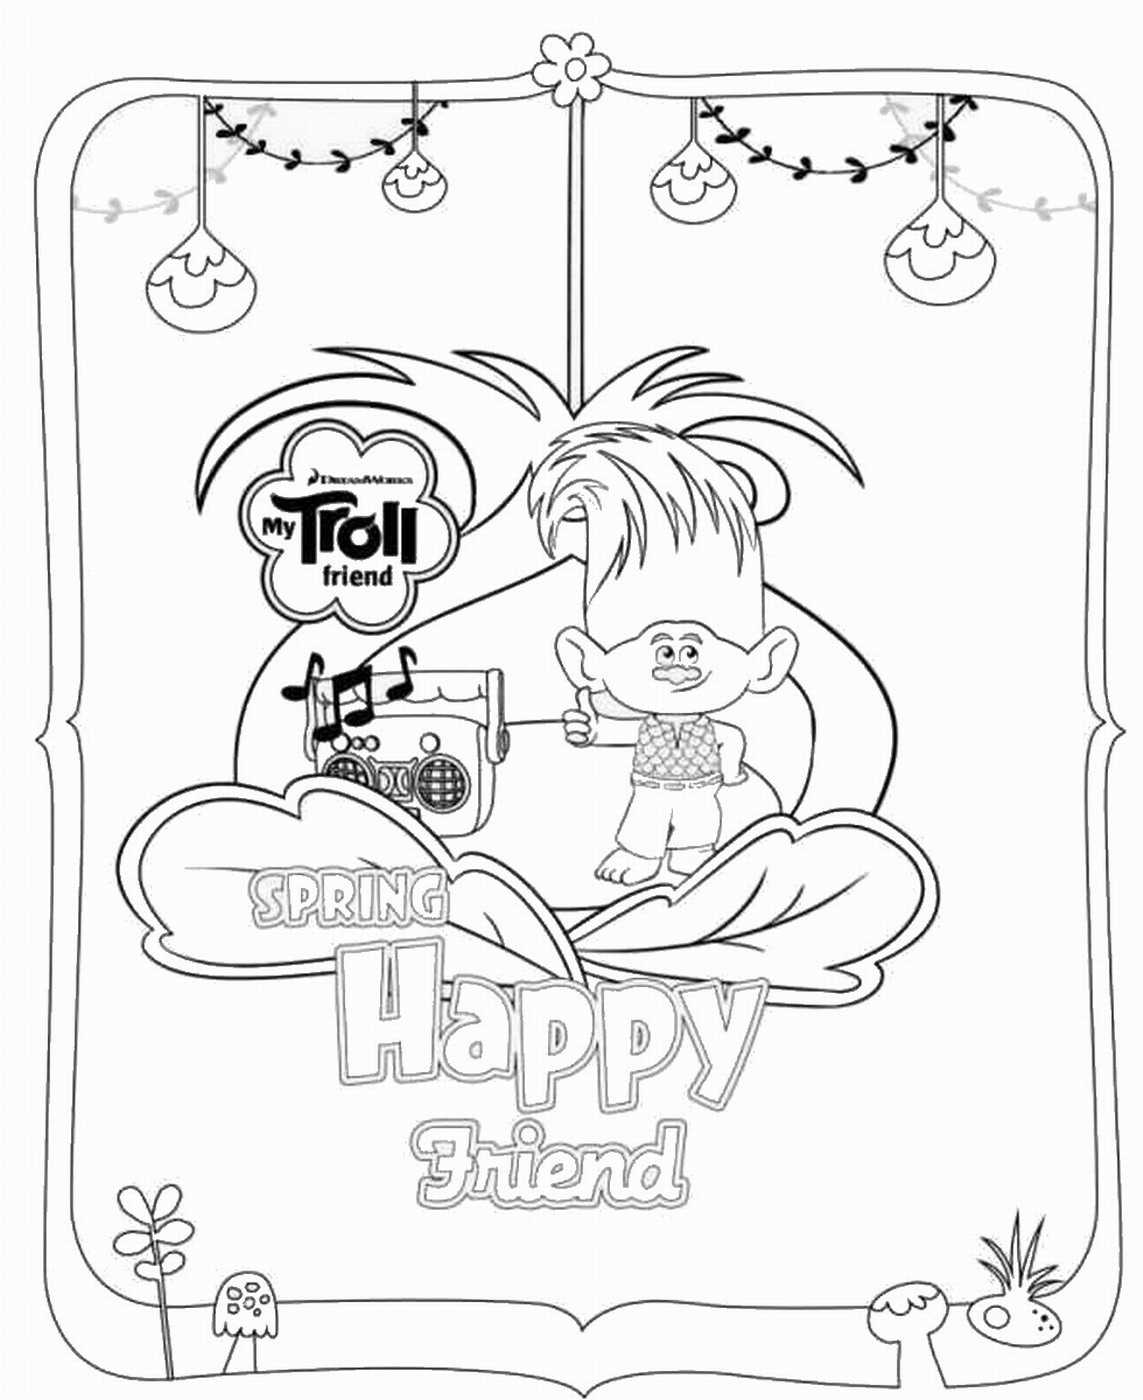 Beautiful Trolls coloring page to print and color